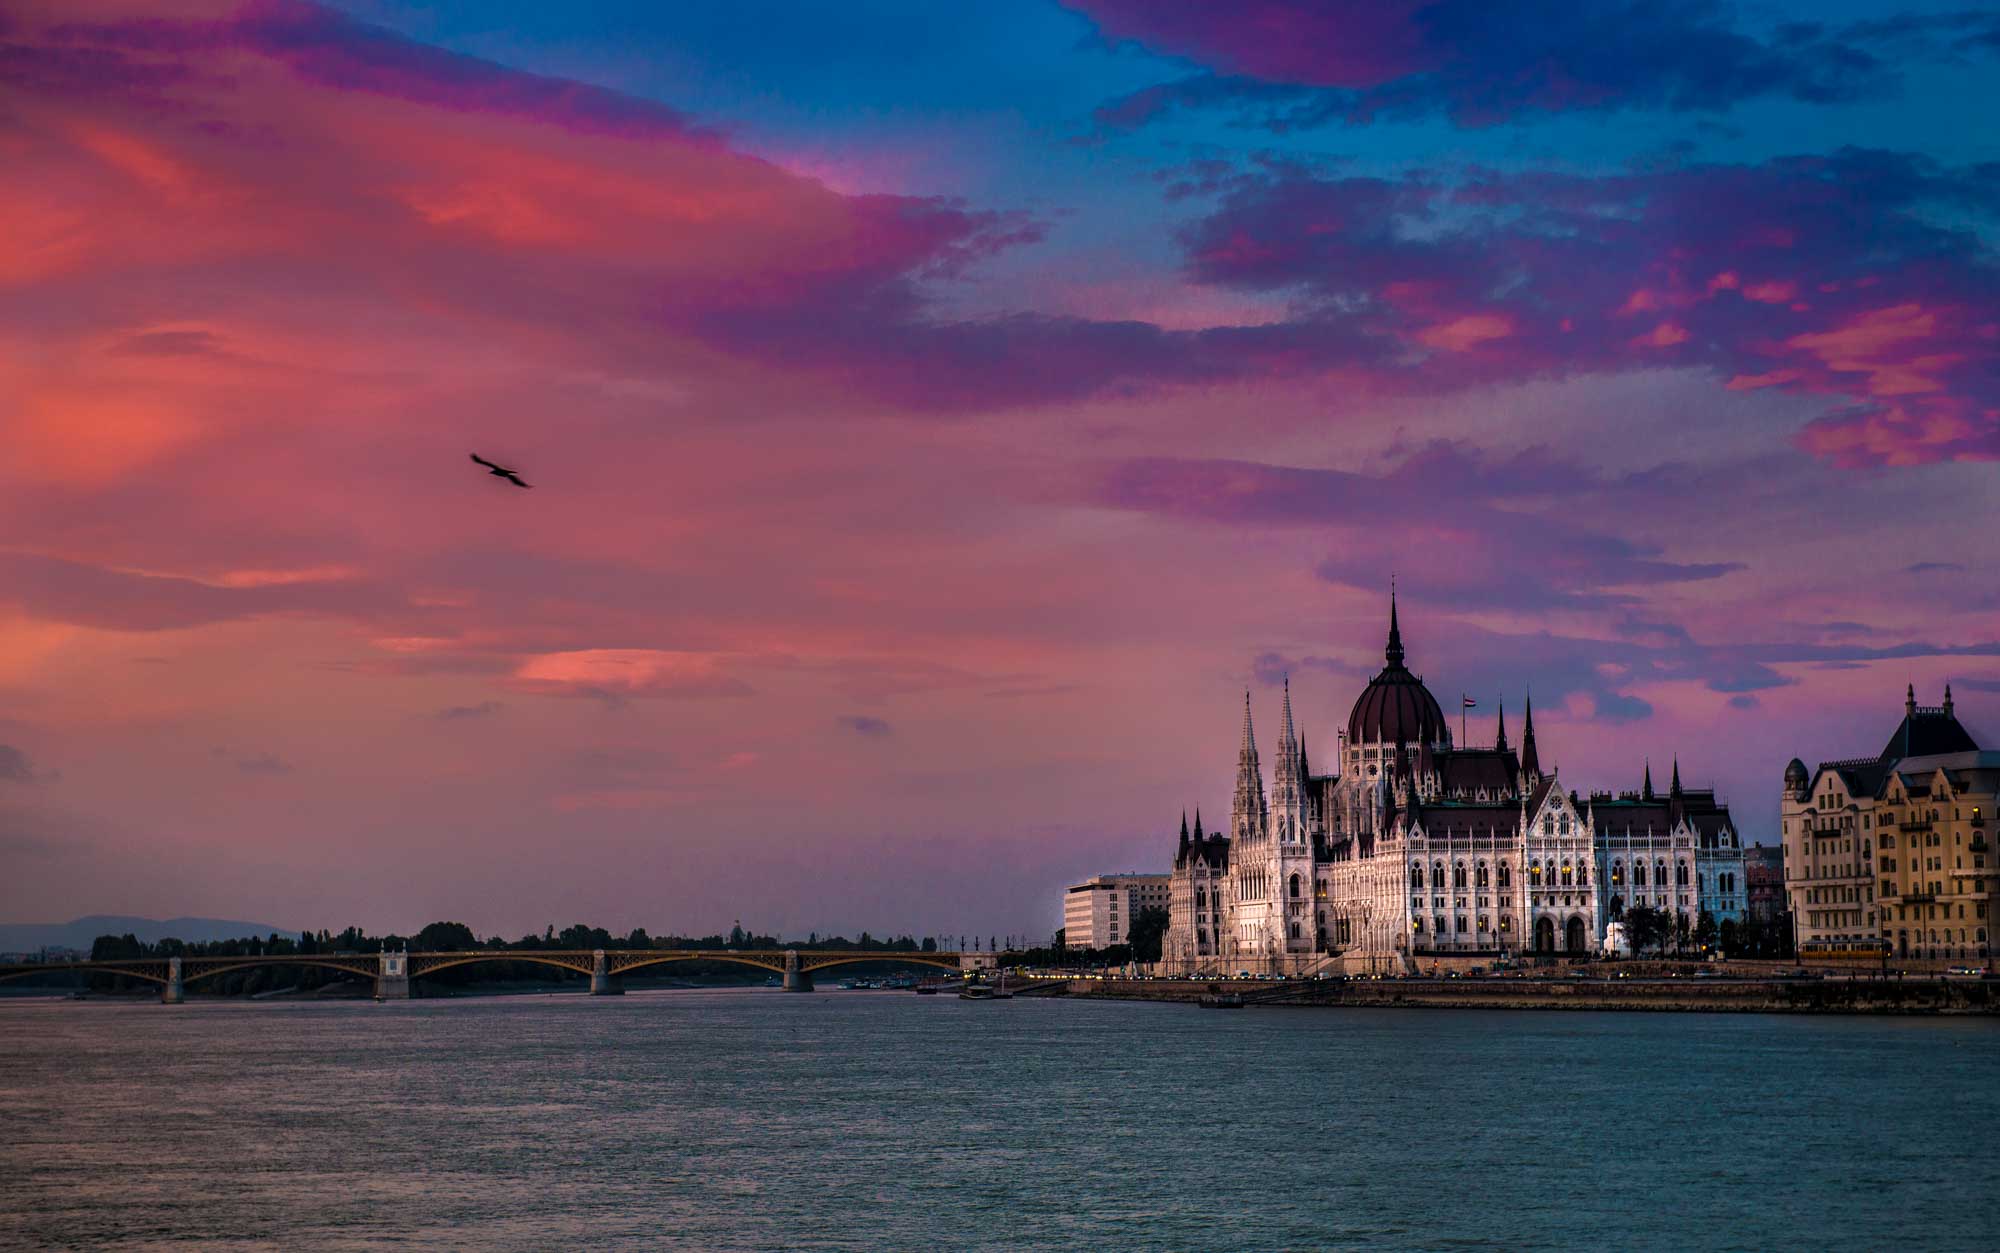 Danube and Parliament, Budapest, Hungary - Travel Past 50